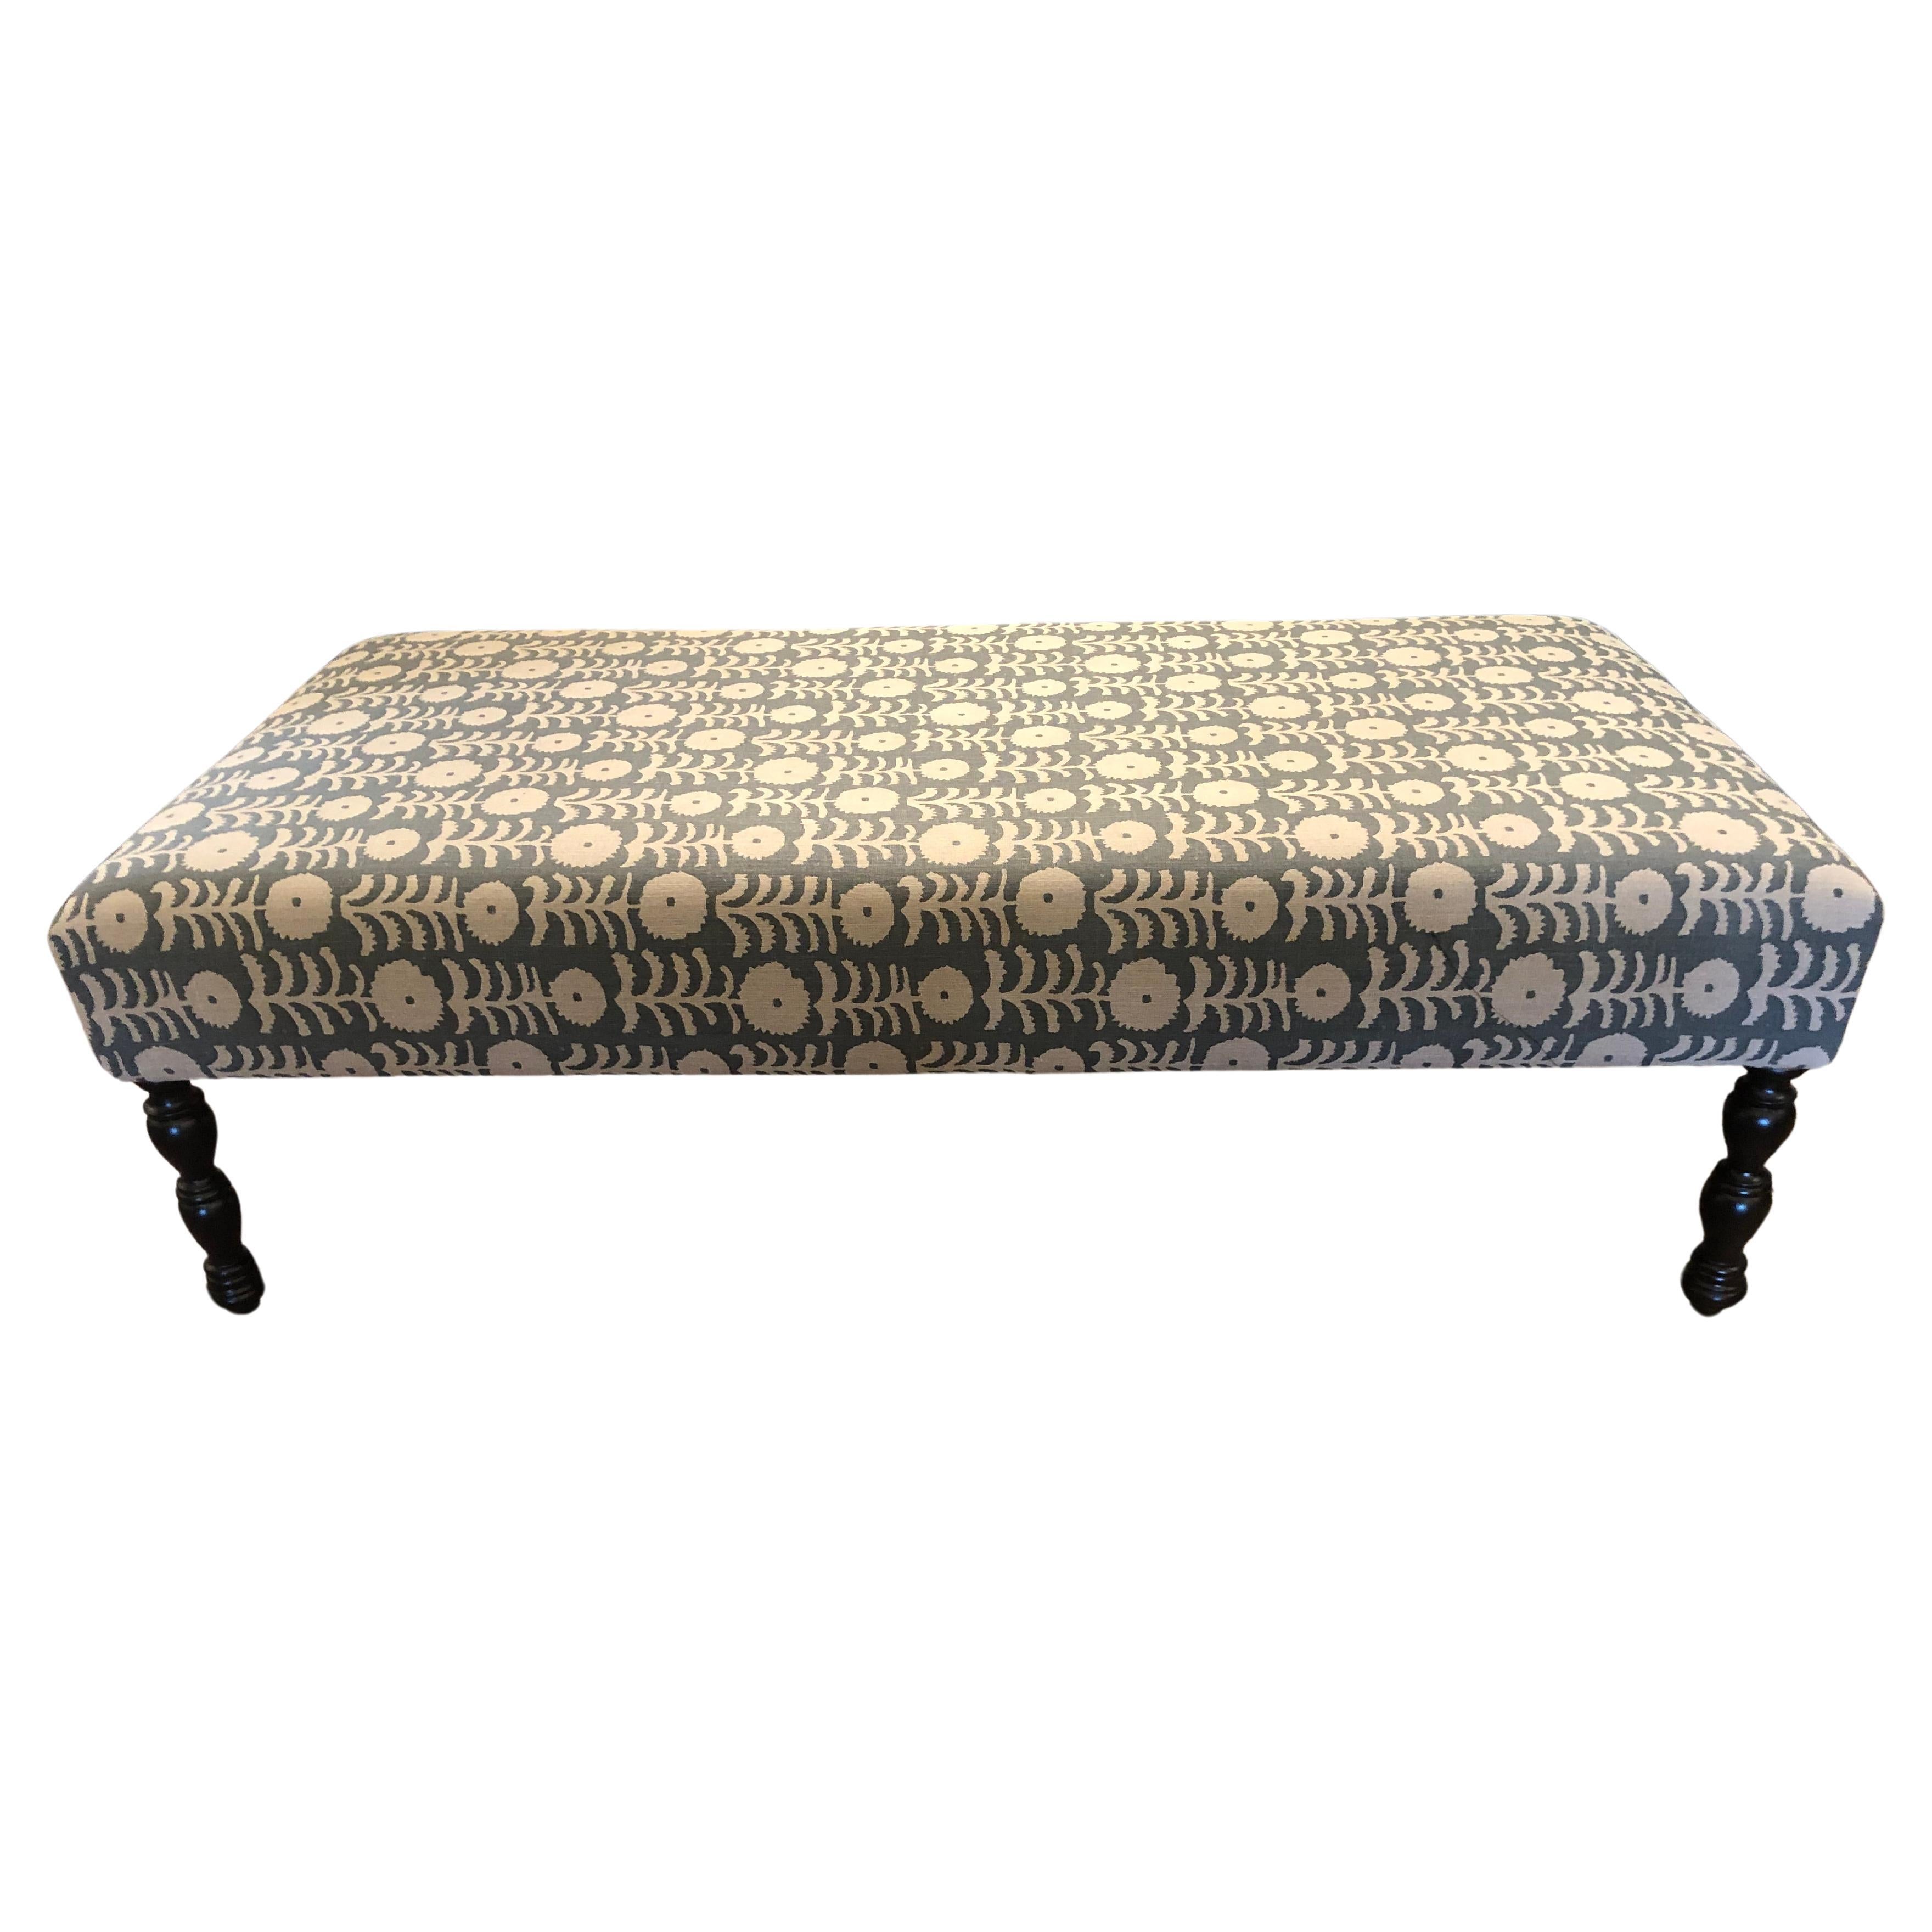 Very Large Charming Upholstered Ottoman Coffee Table For Sale